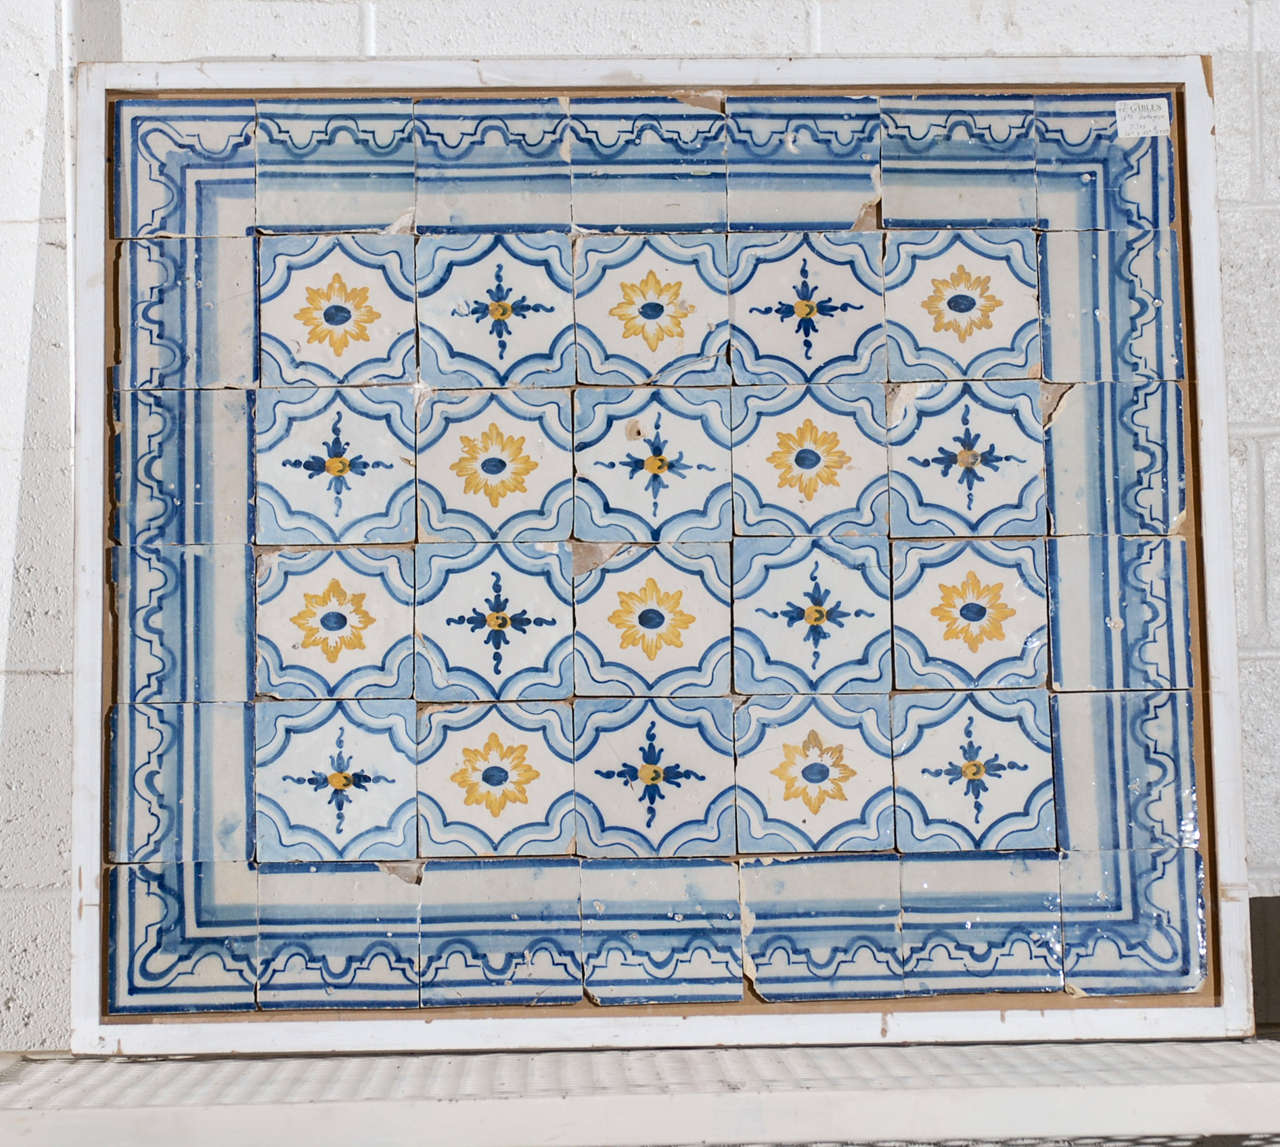 18th Century Portugese Tiles in Blue and Yellow, Circa 1780
Ceramic tile making is an ancient art form from Portugal.  This wonderful set of tiles, made for a special place in an old villa, has kept the beautiful colors of blue and yellow.  The